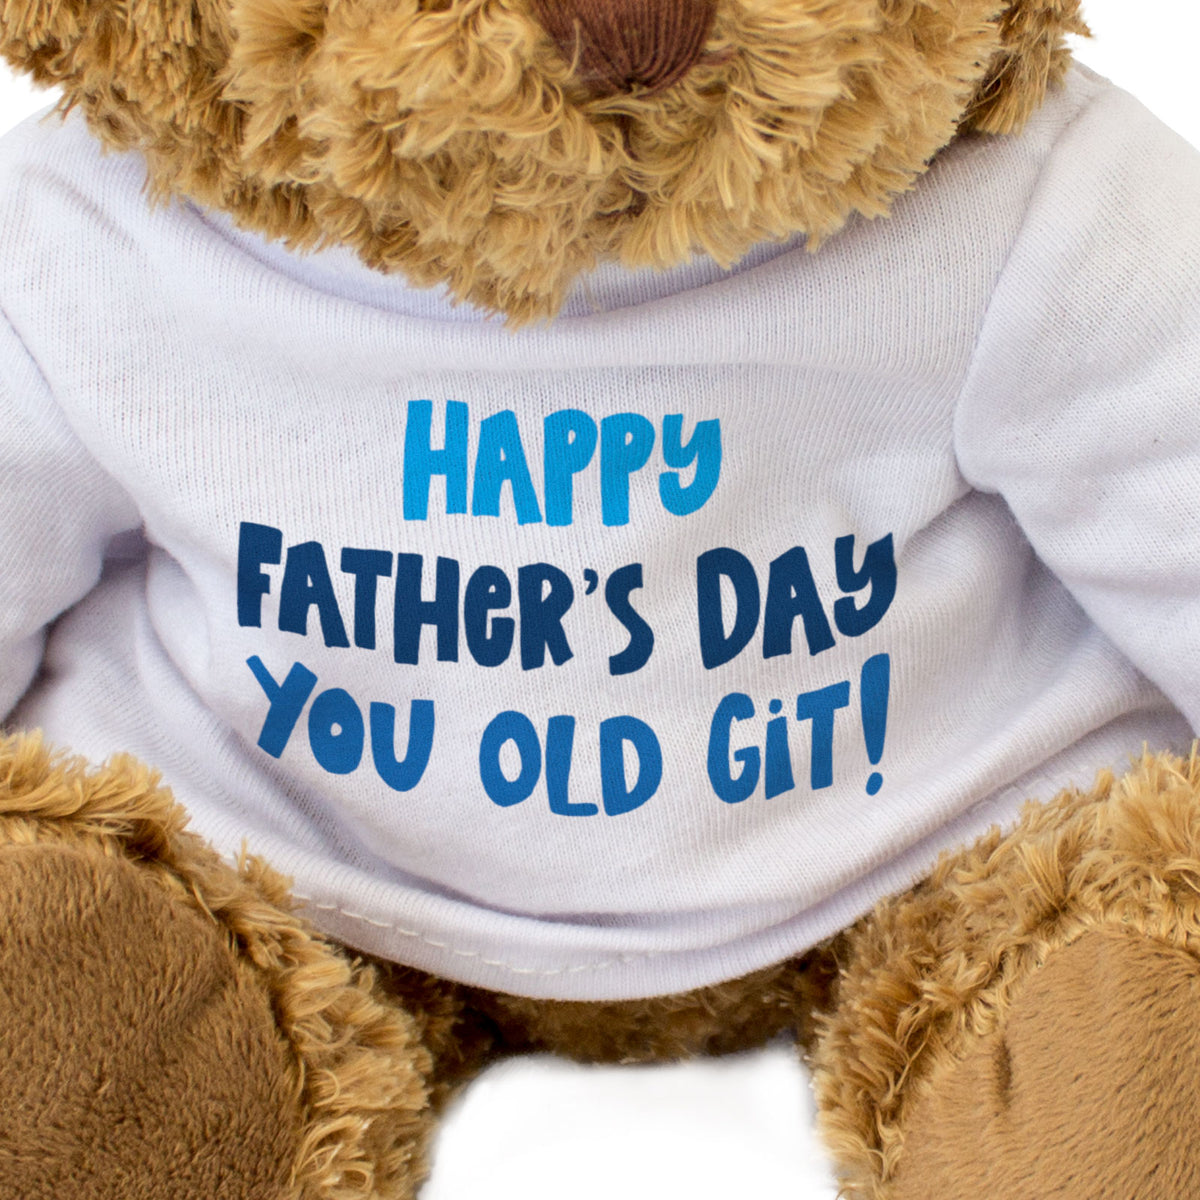 Happy Father's Day You Old Git - Teddy Bear - Gift Present